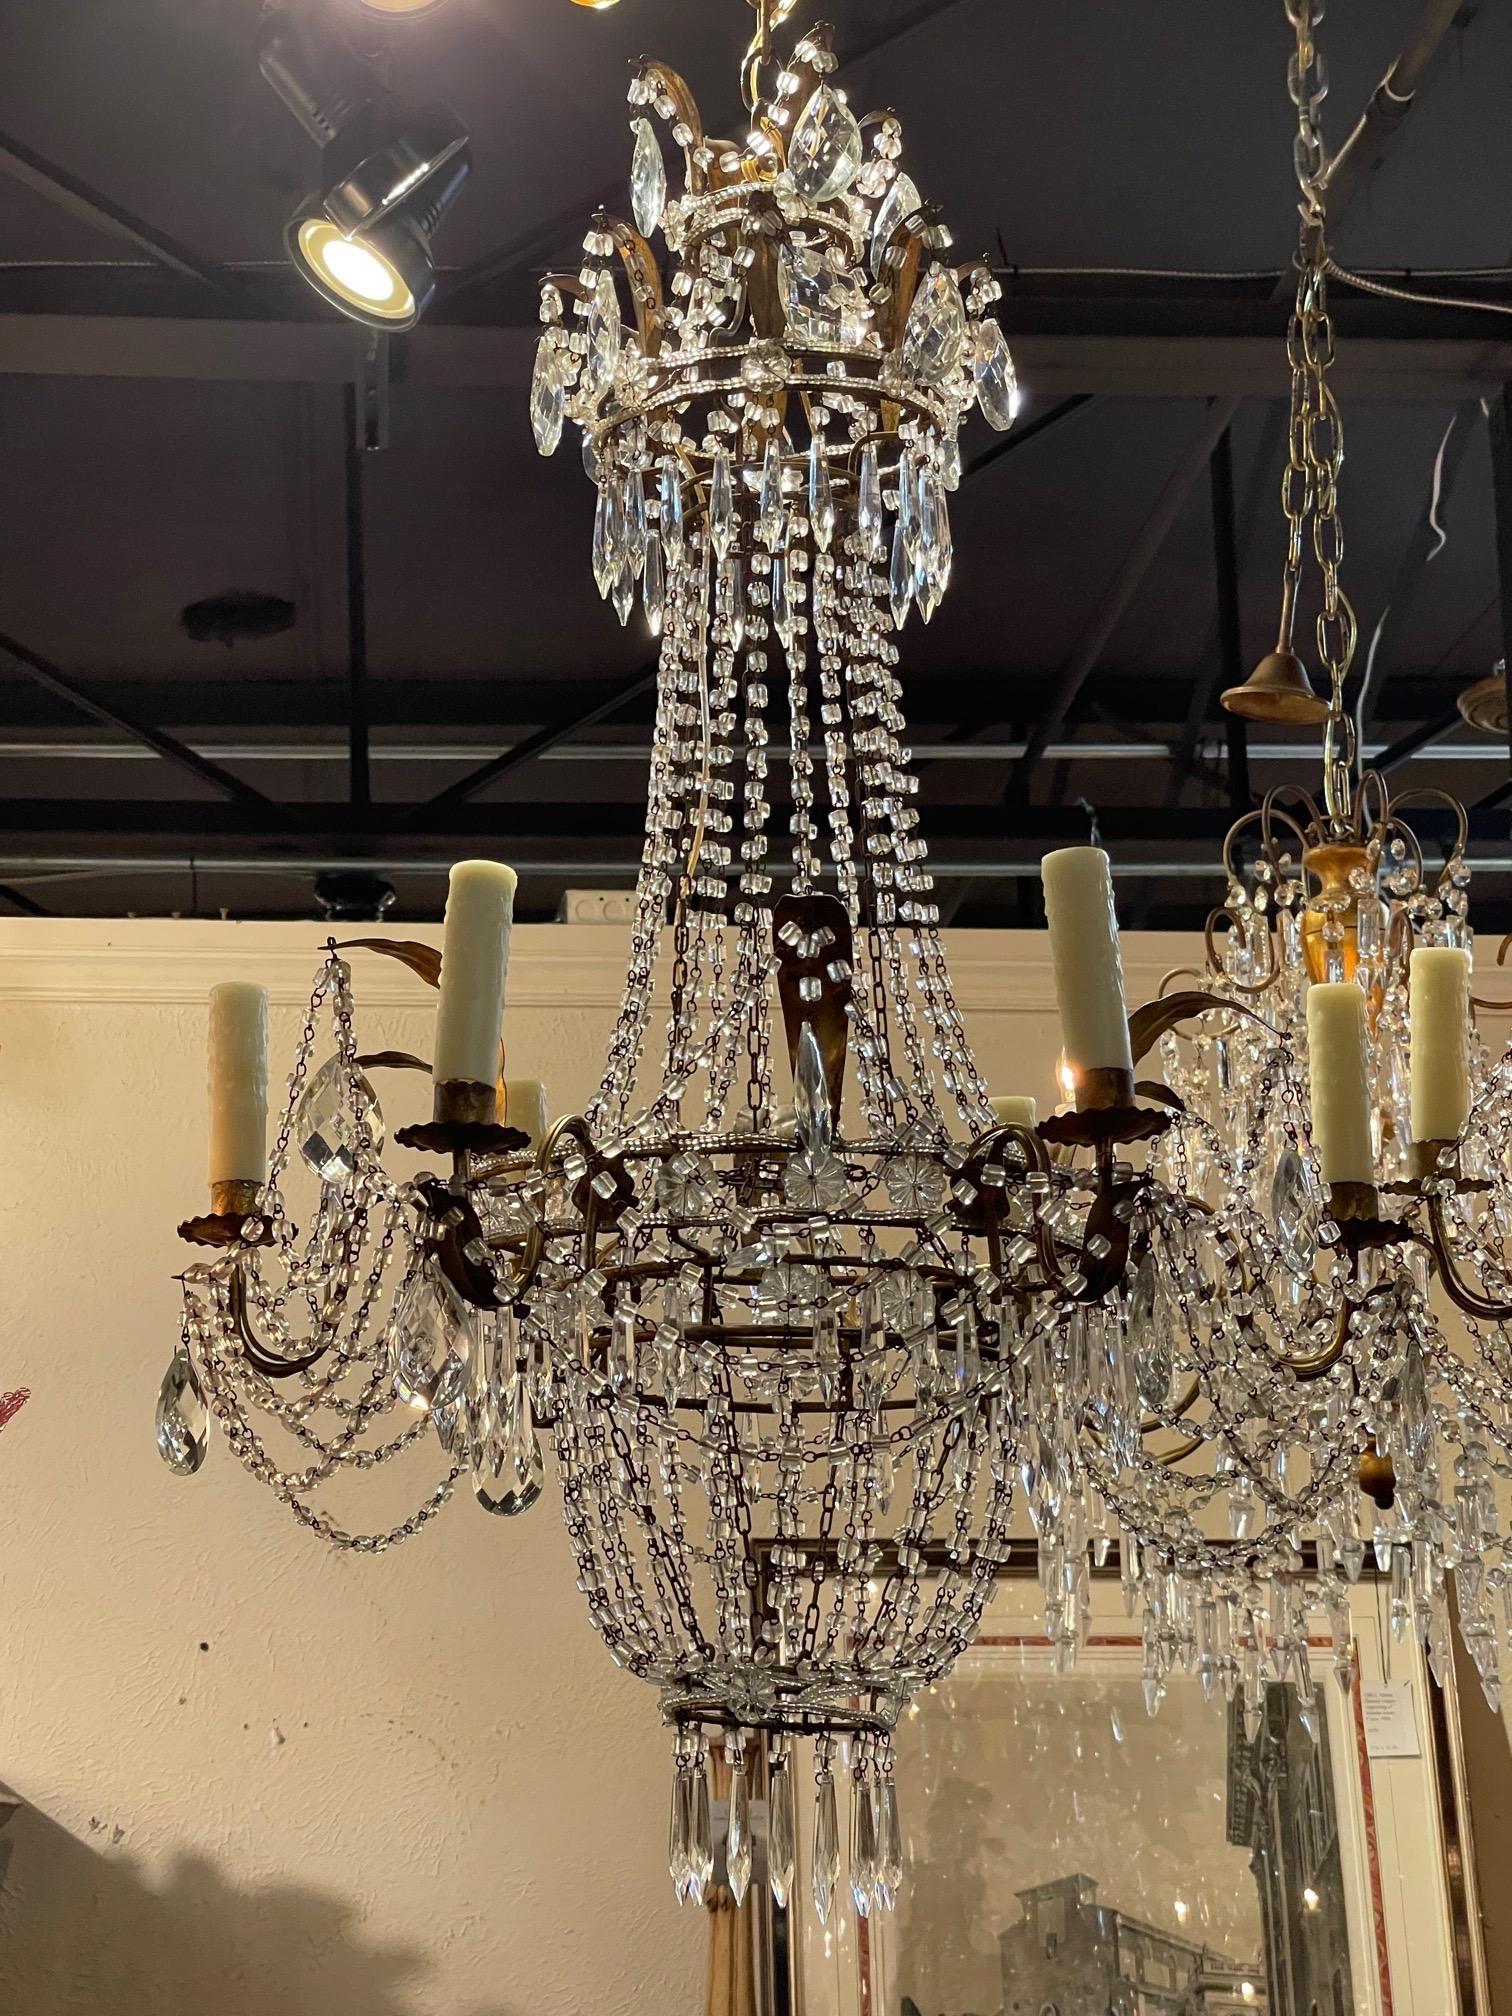 Very fine pair of antique Italian beaded crystal basket style chandeliers. Covered in gorgeous crystals and prisms. Fabulous!!